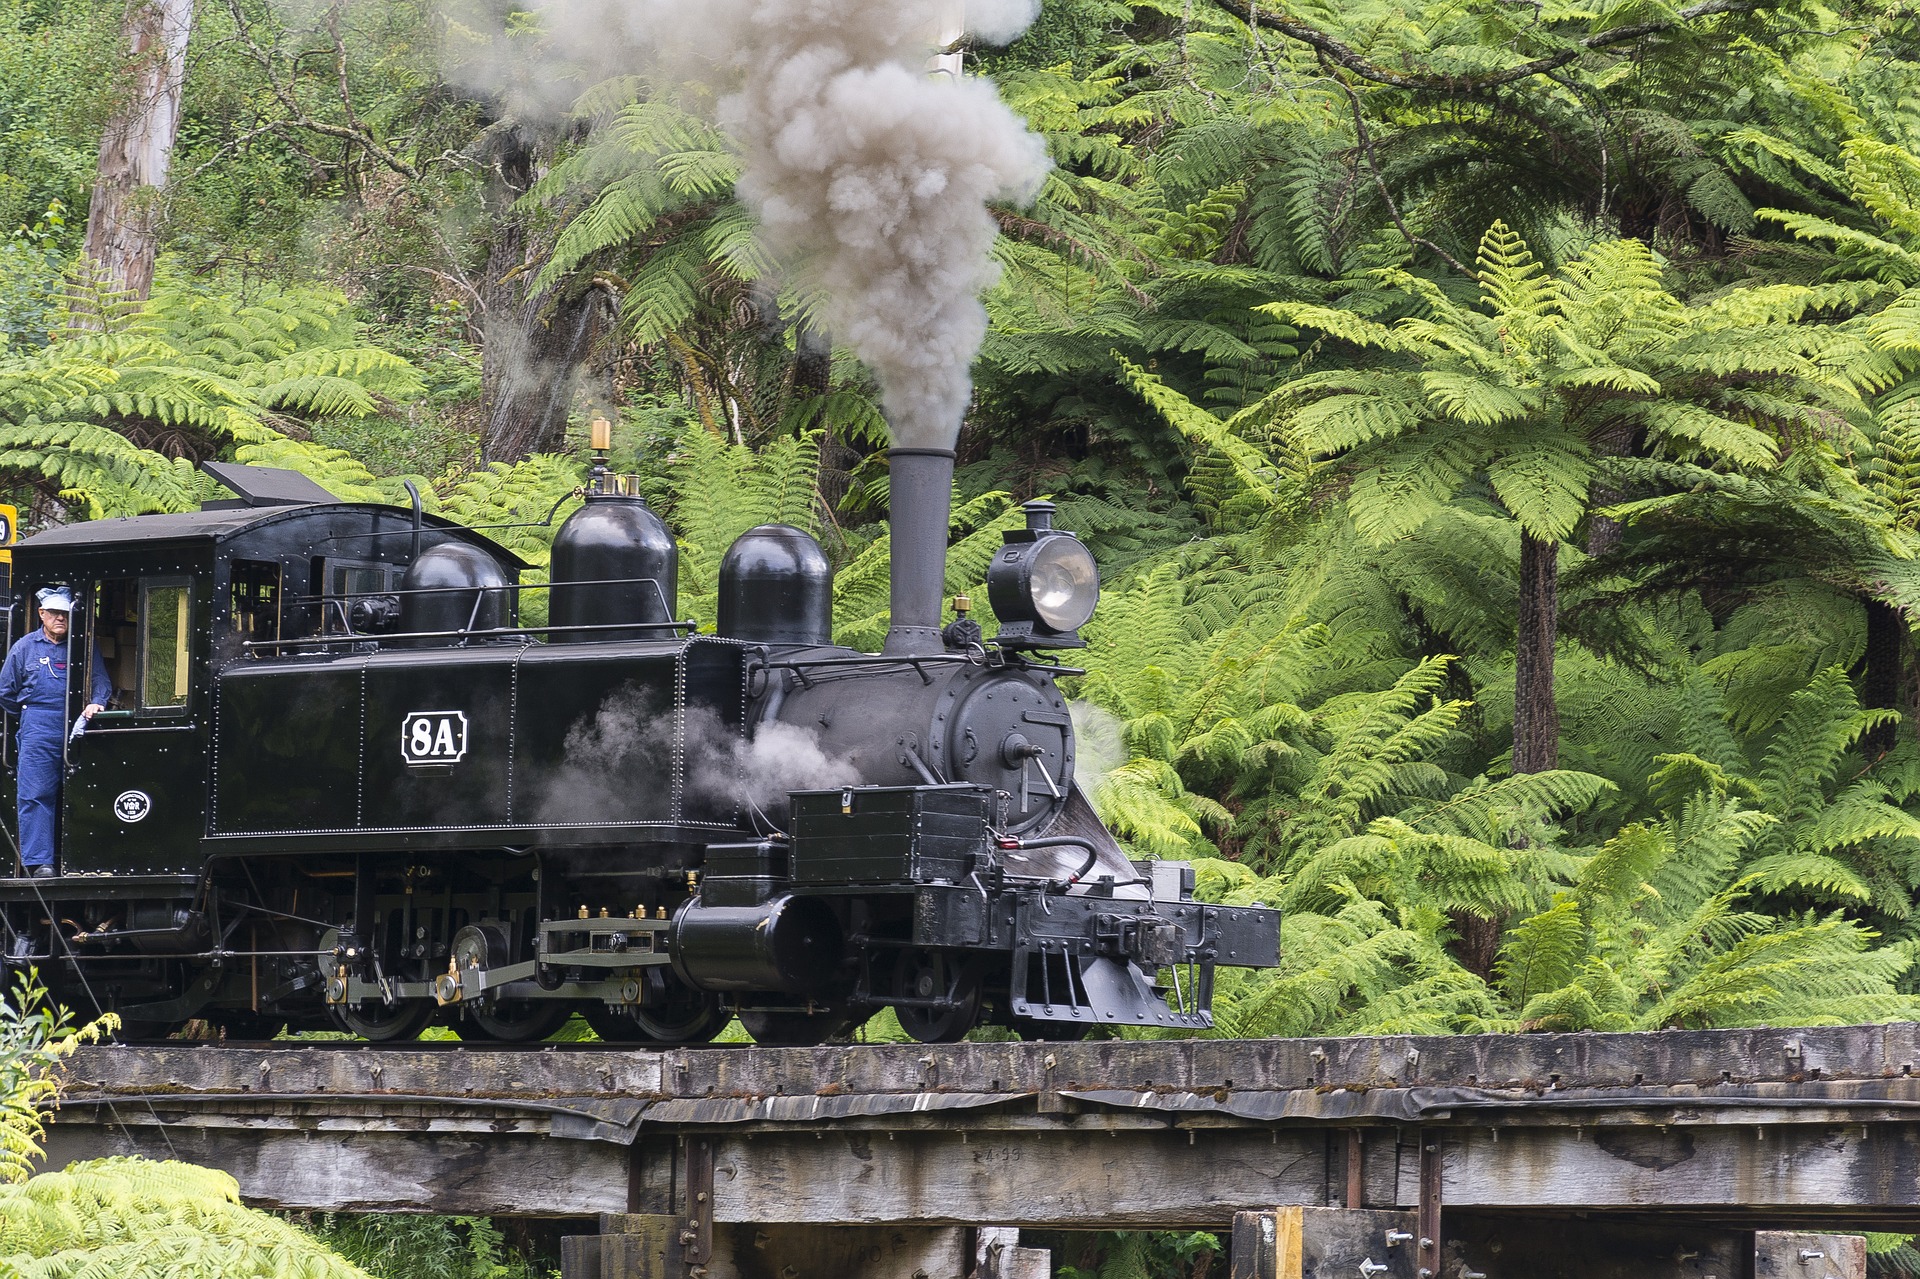 An image of the Puffing Billy Steam Engine